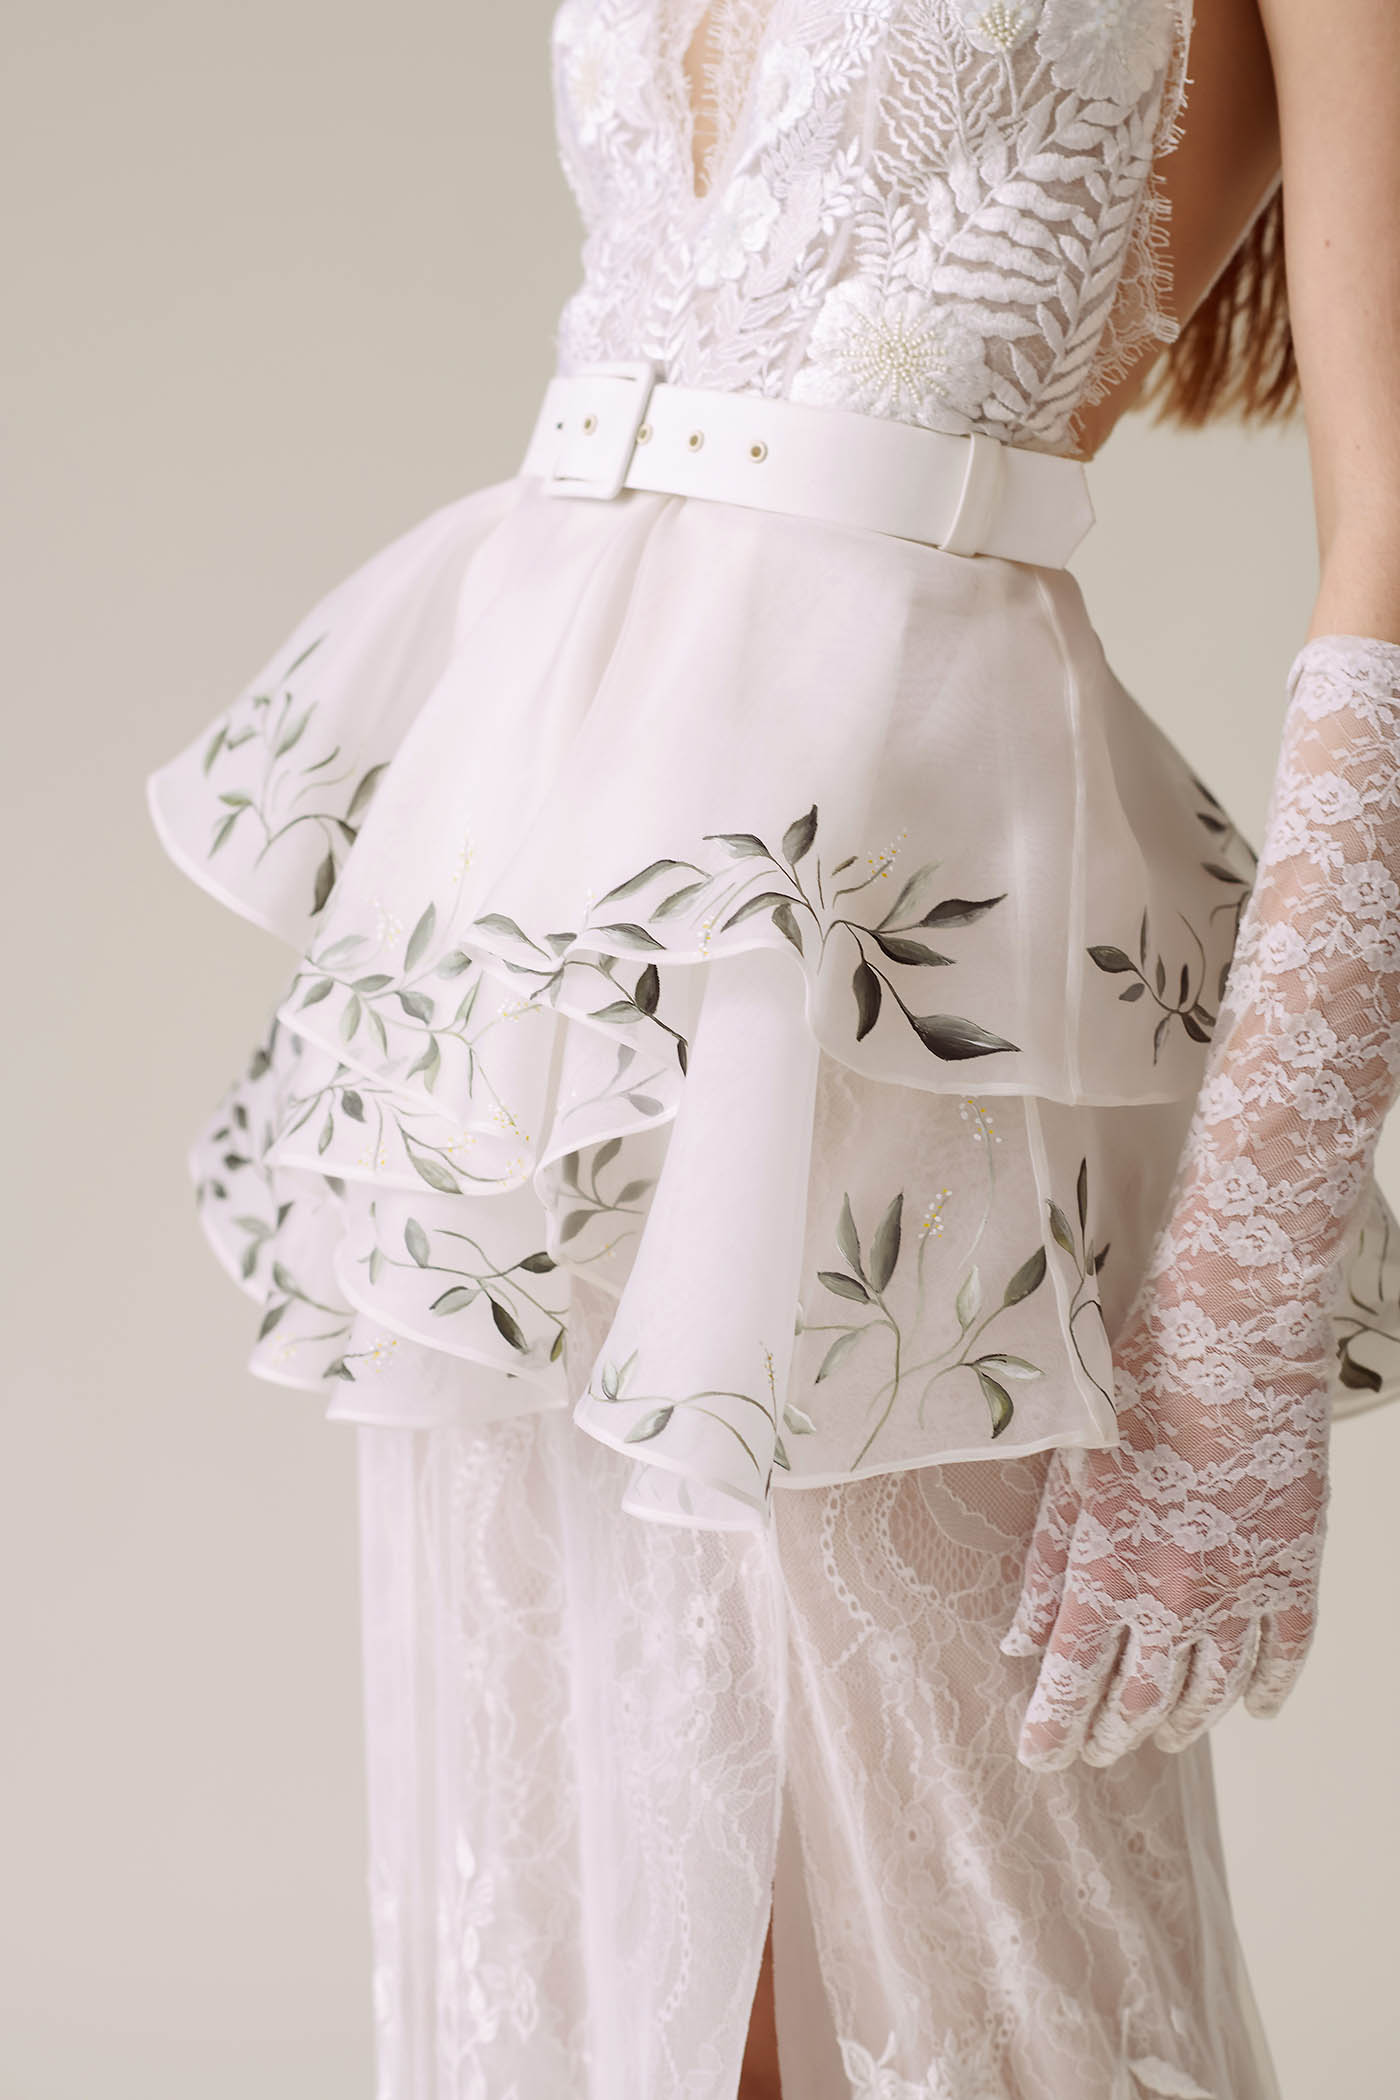 Fern and Lace Gown | Hand Painted Bougainvillea Peplum